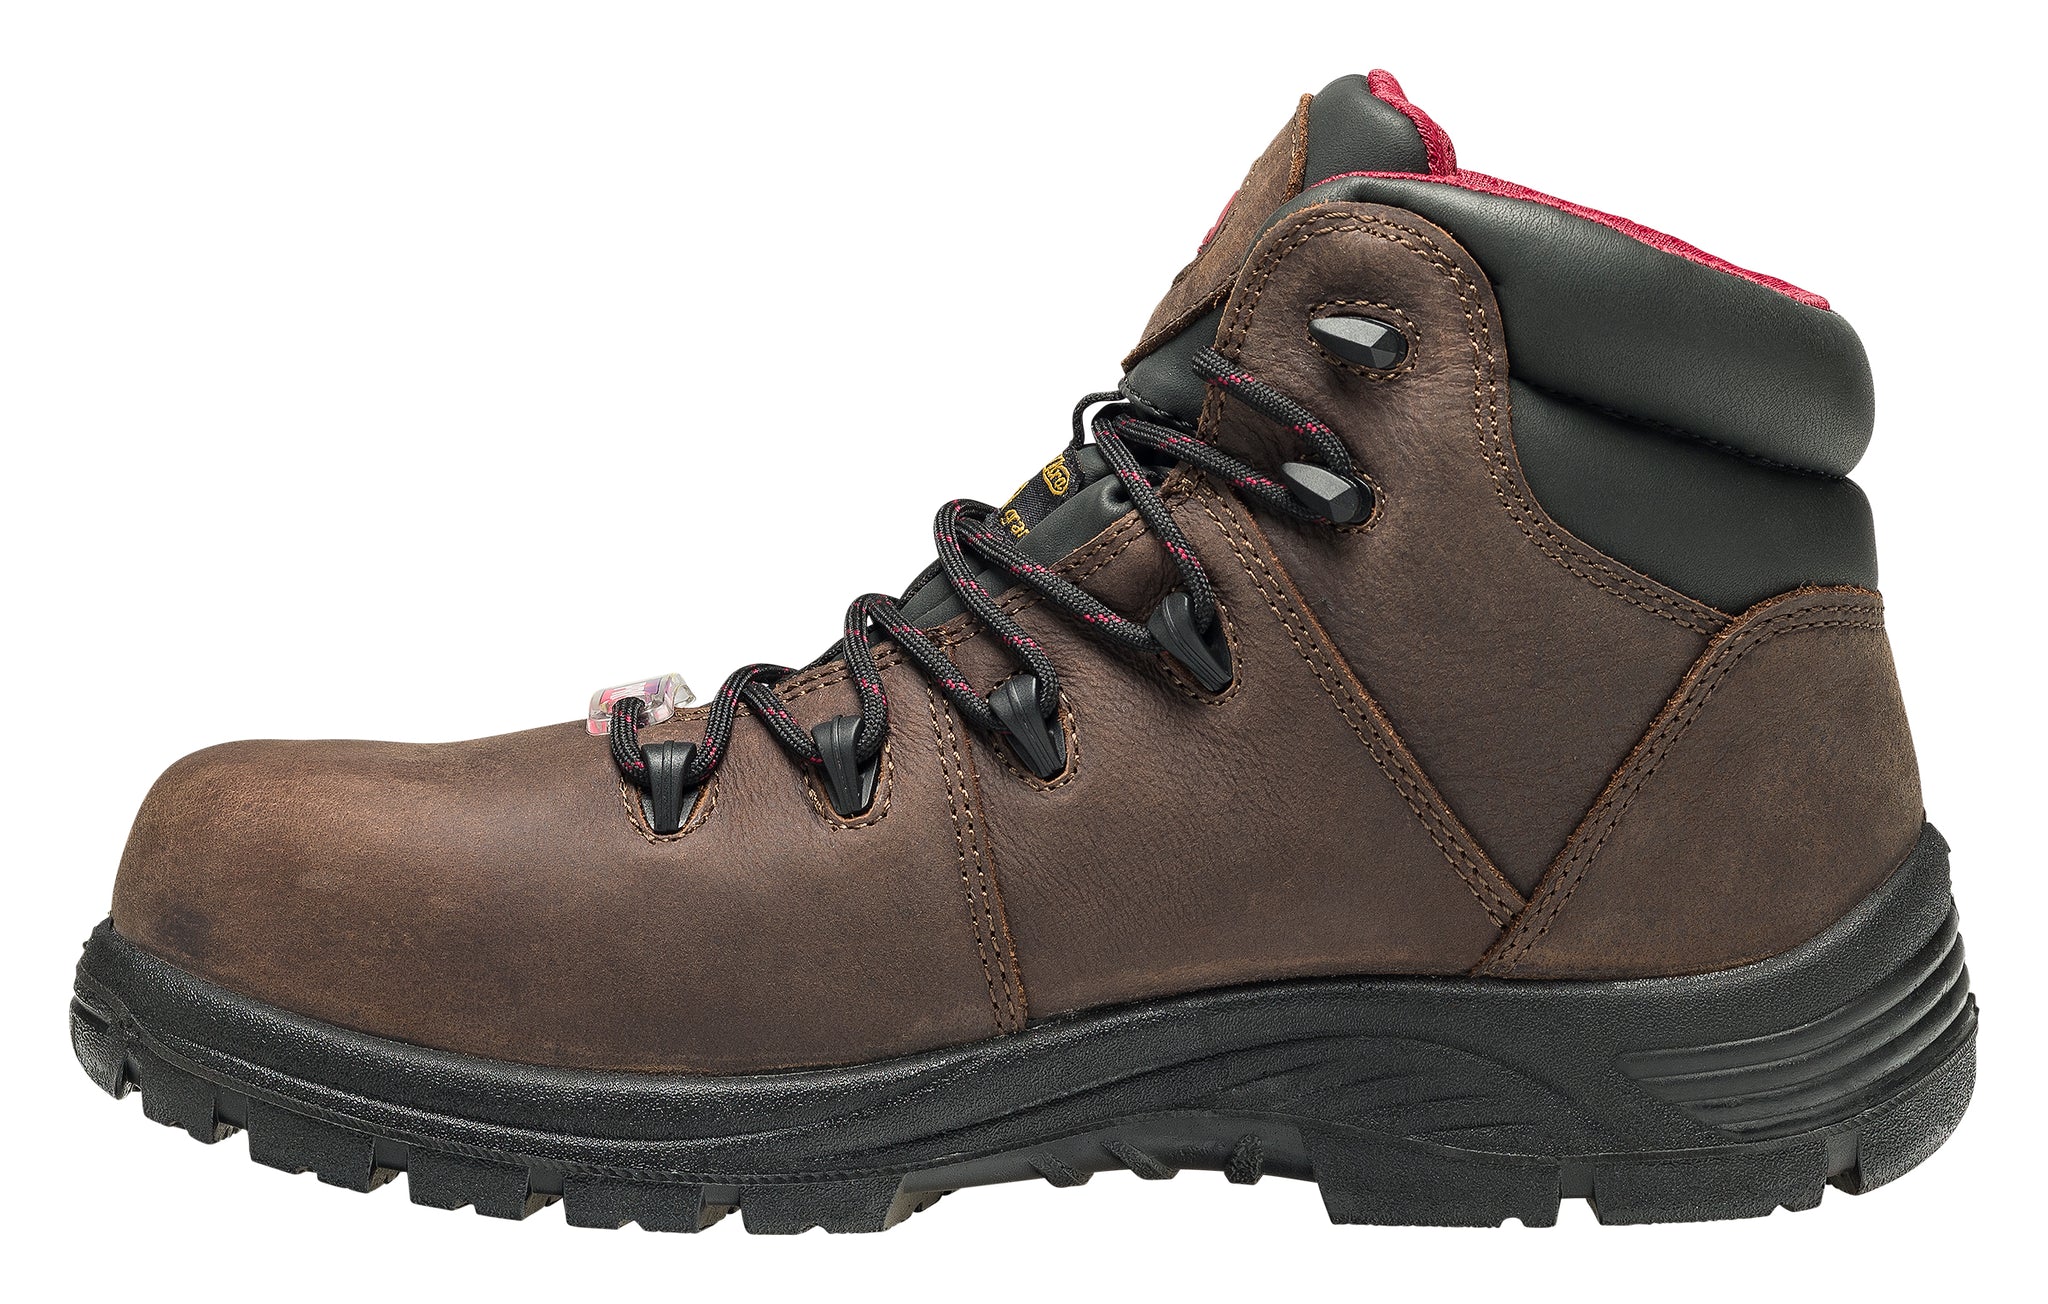 400g insulated work boots